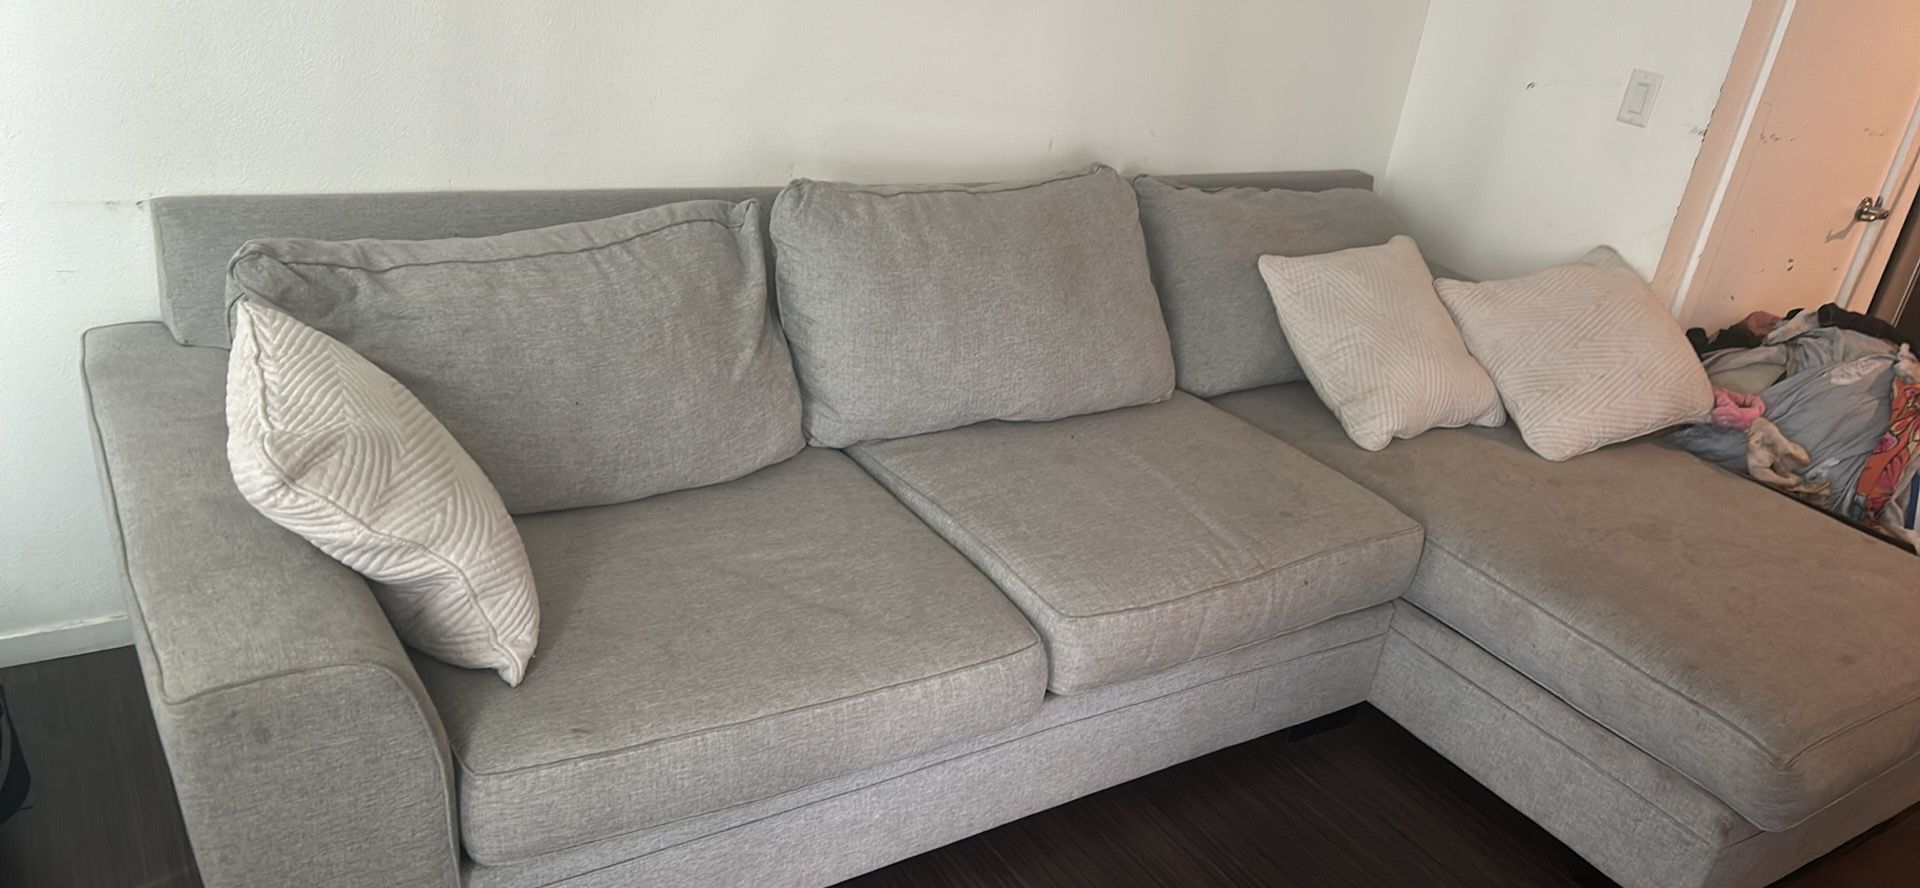 Sectional couch. $75